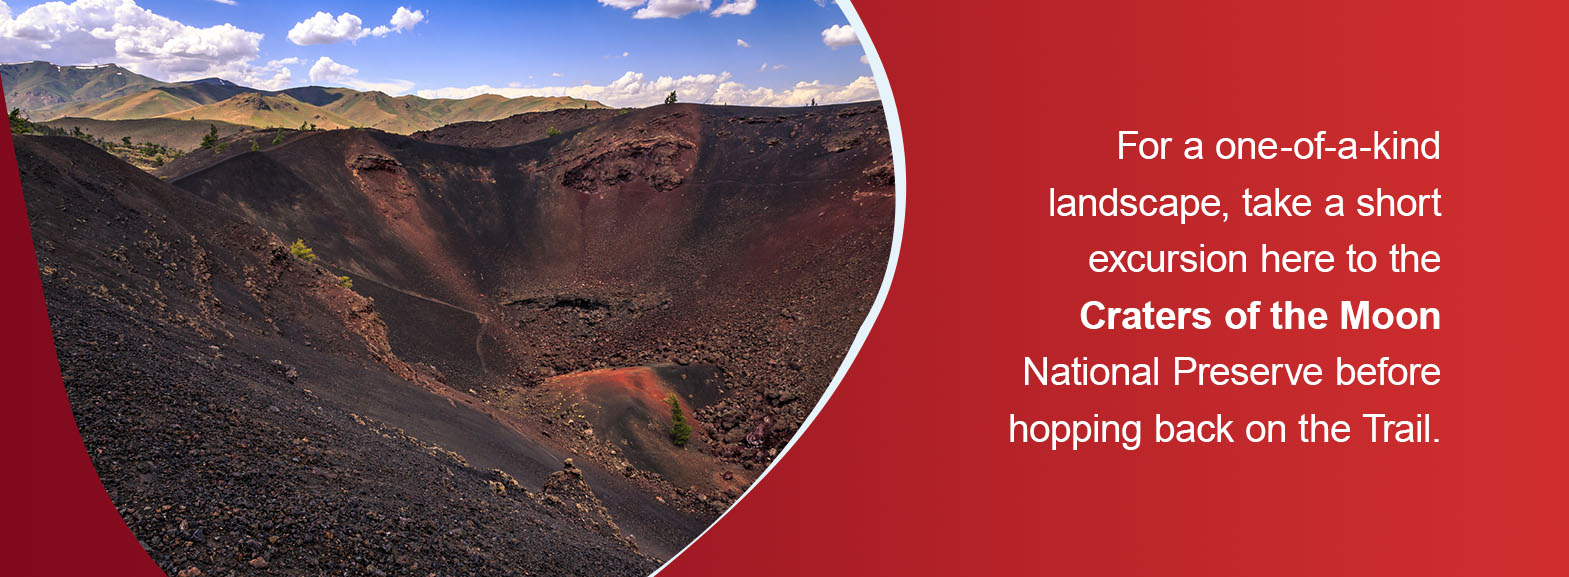 For a one-of-a-kind landscape, take a short excursion here to the Craters of the Moon National Preserve before hopping back on the Trail. 